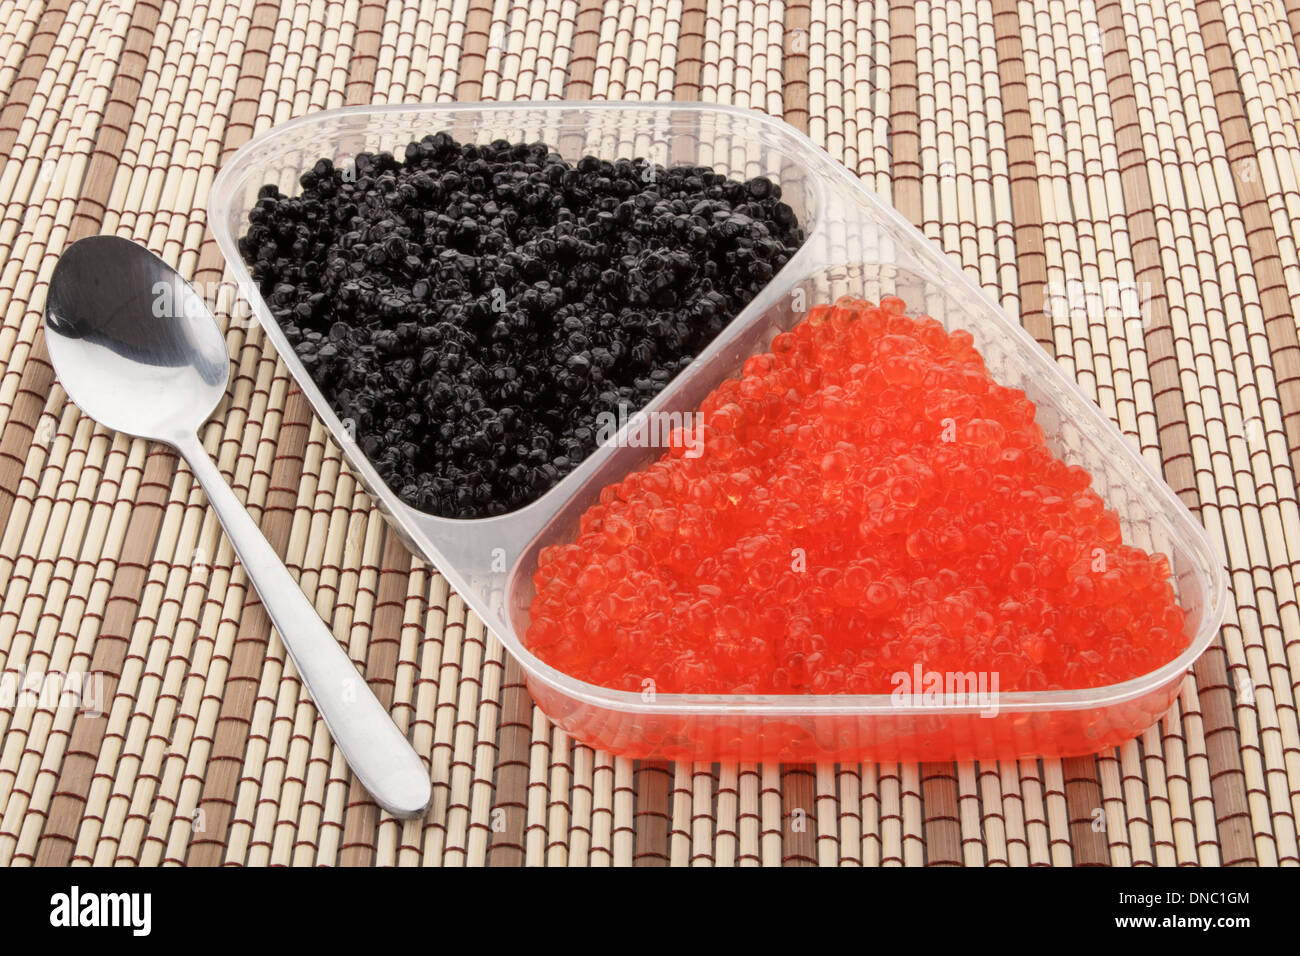 Close up of red and black caviar in a plastic container Stock Photo